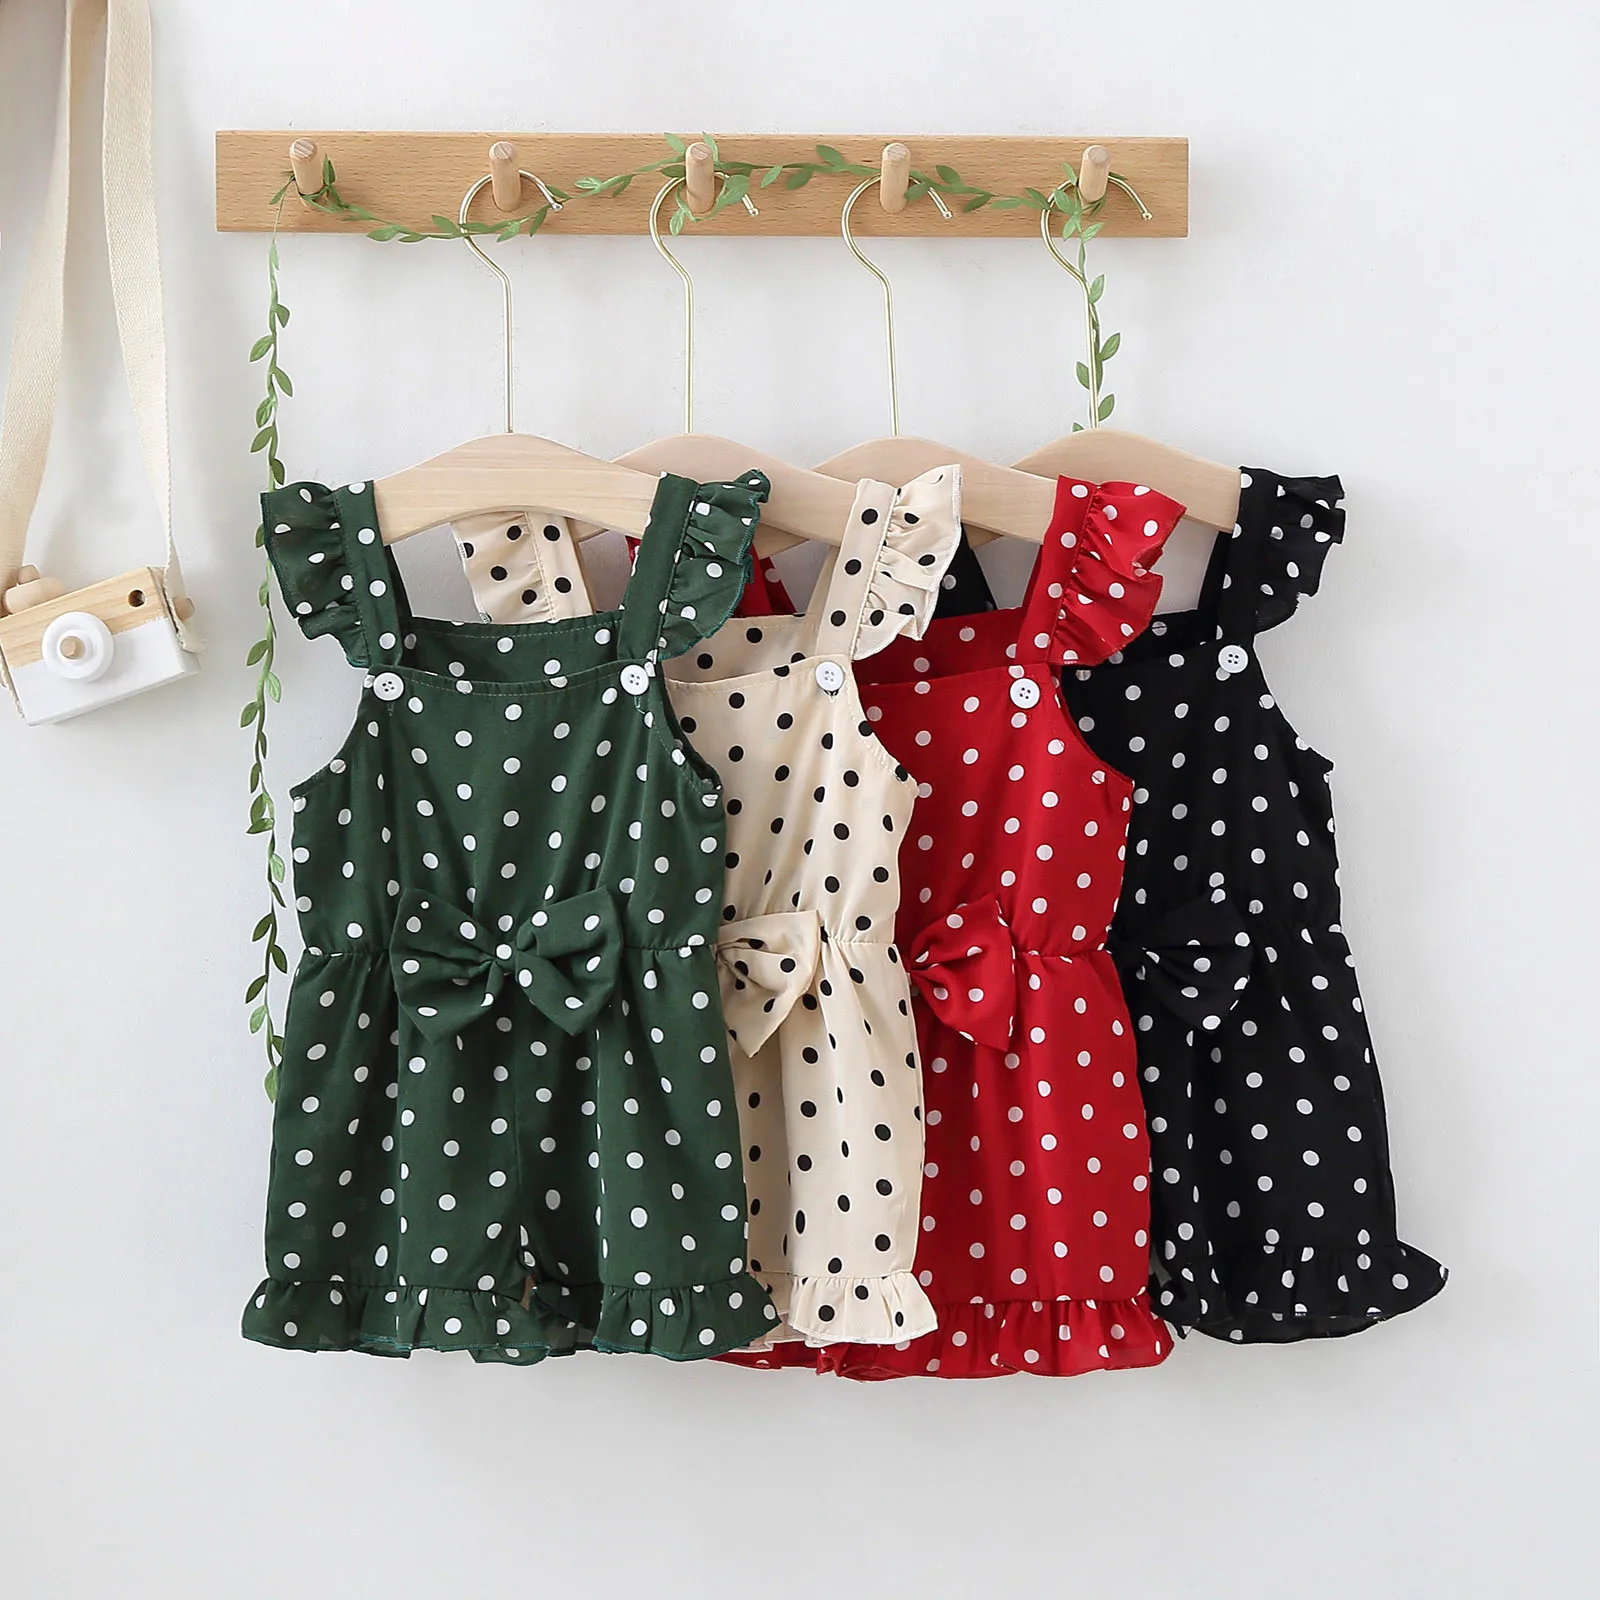 

Toddler Baby Girls Ruffles Dot Printed Bowknot Suspender Romper Jumpsuit Summer Newborn Baby Girl Clothes ropa bebe niÃ±a